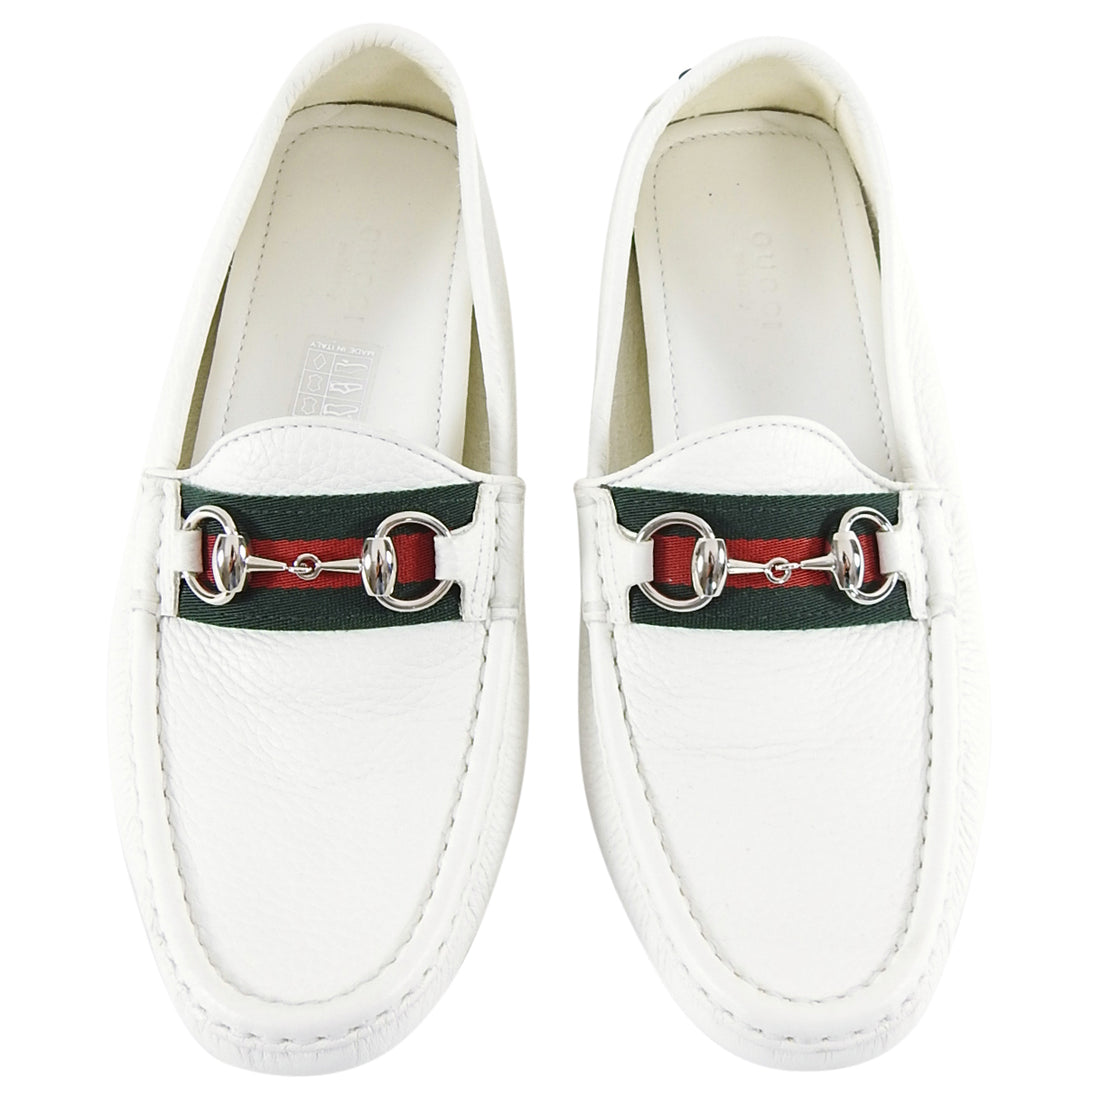 Gucci White Leather Web Stripe Horsebit Driving Shoes – I MISS YOU VINTAGE